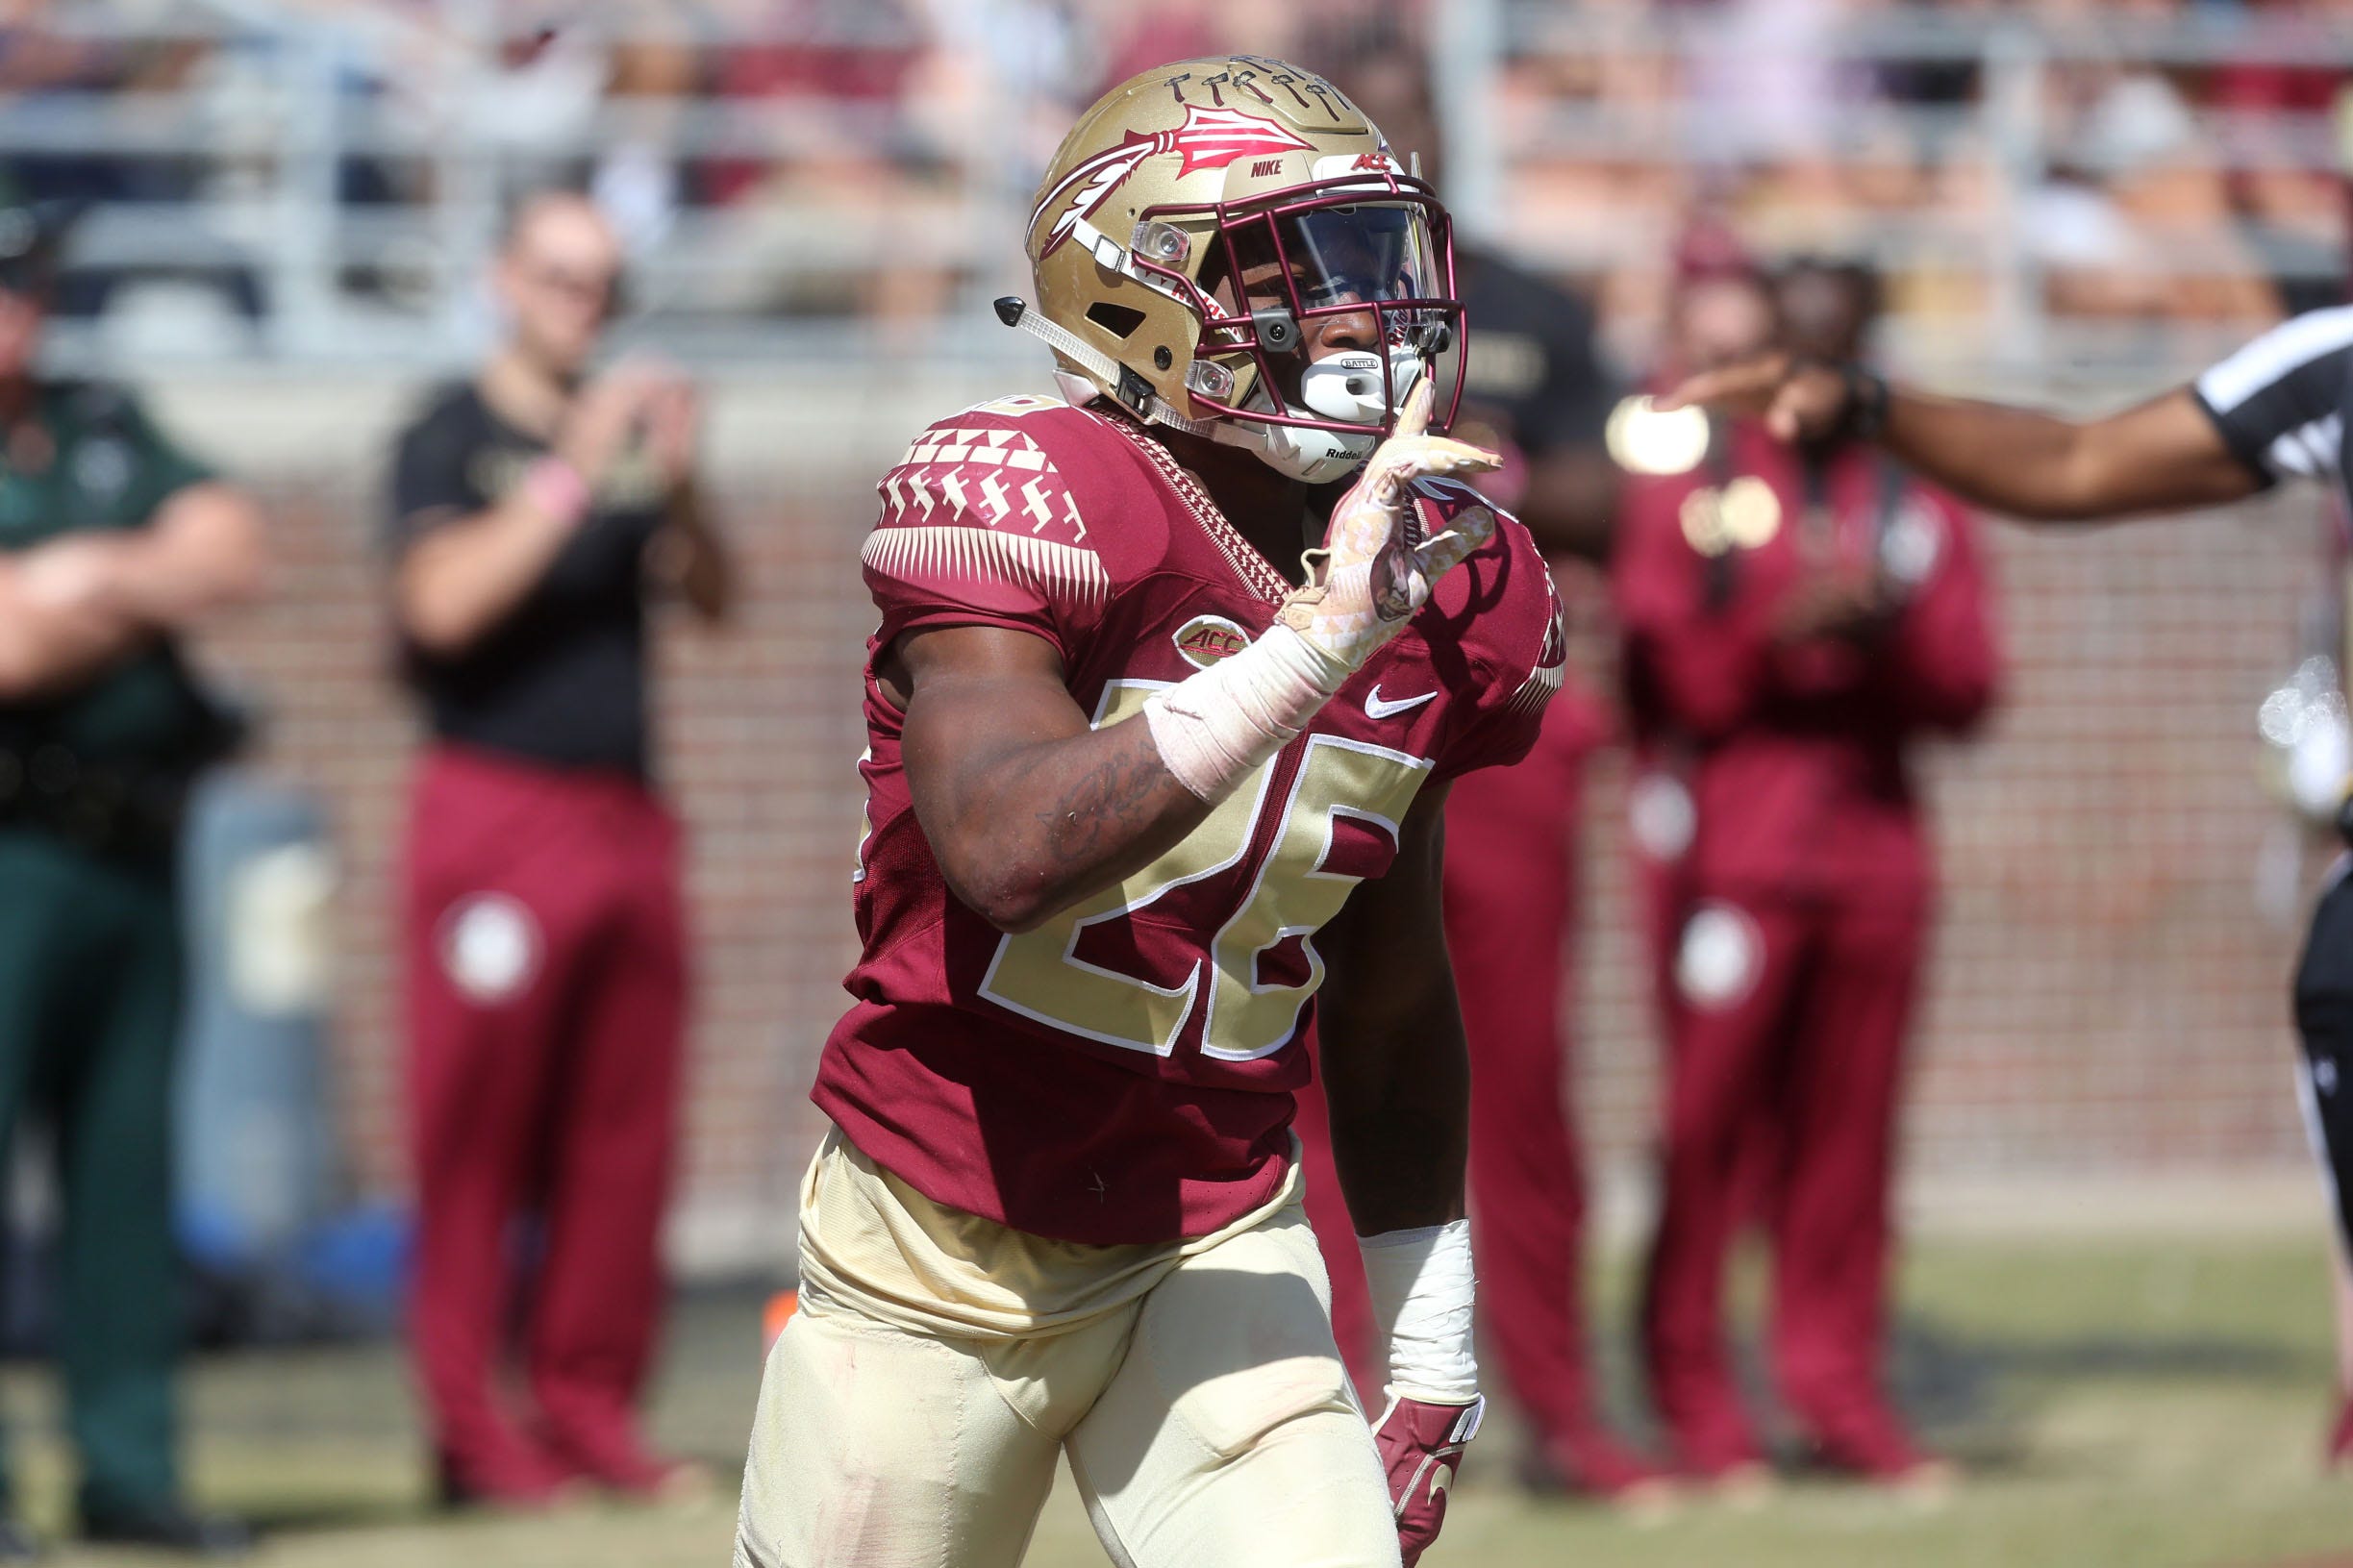 Florida State defensive end Kaindoh selected by Kansas City Chiefs